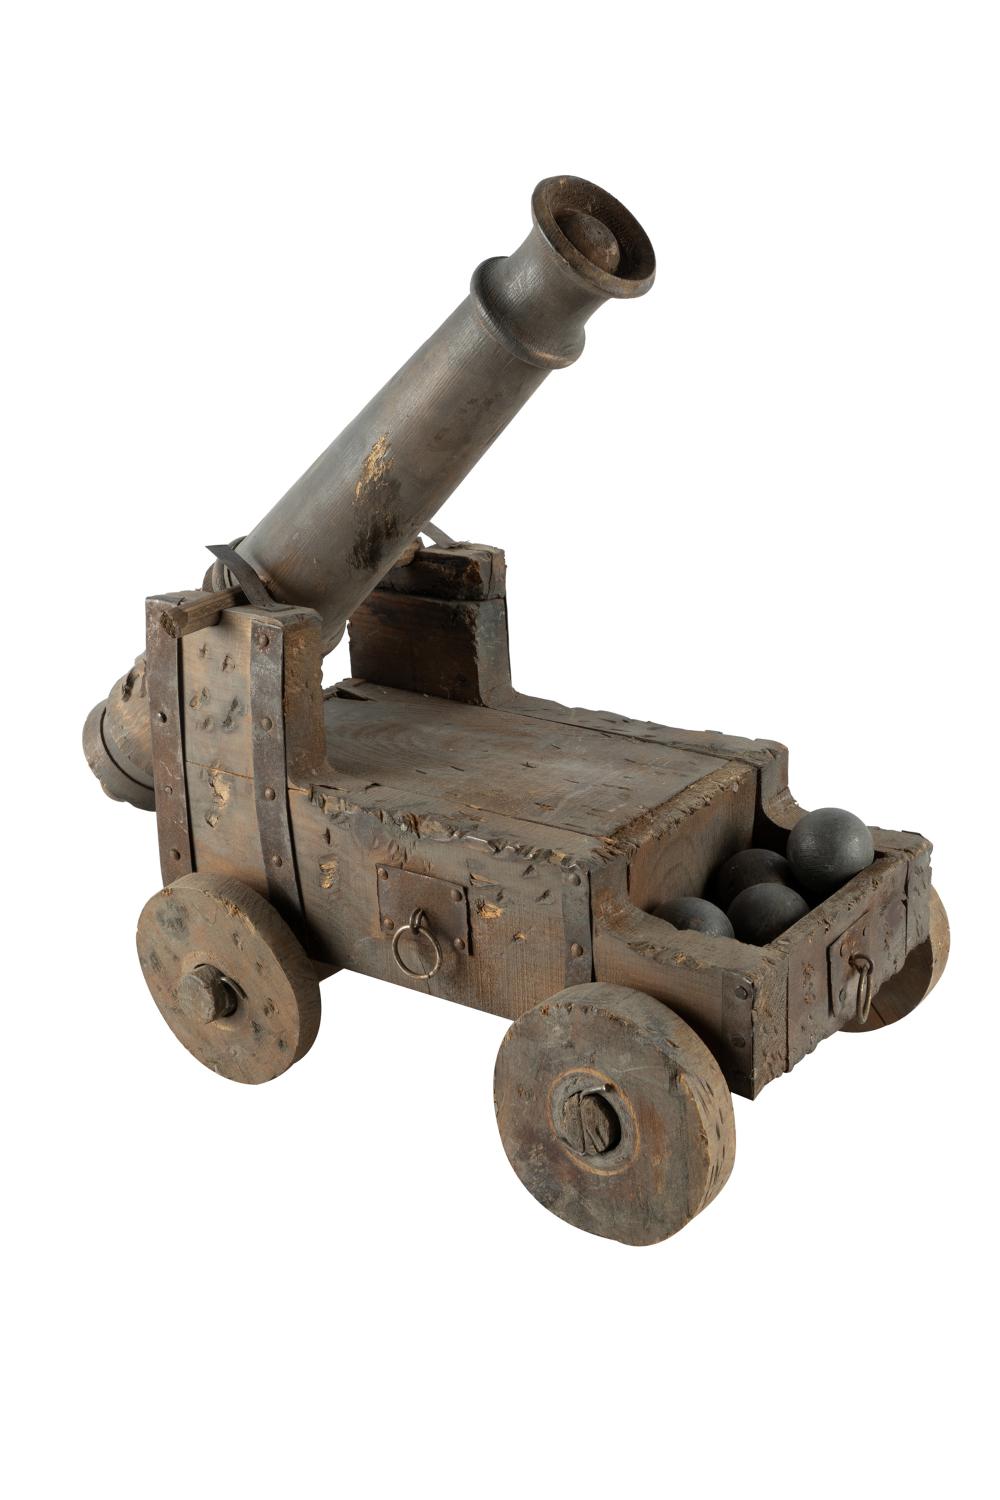 CARVED WOOD CANNON MODELaccompanied